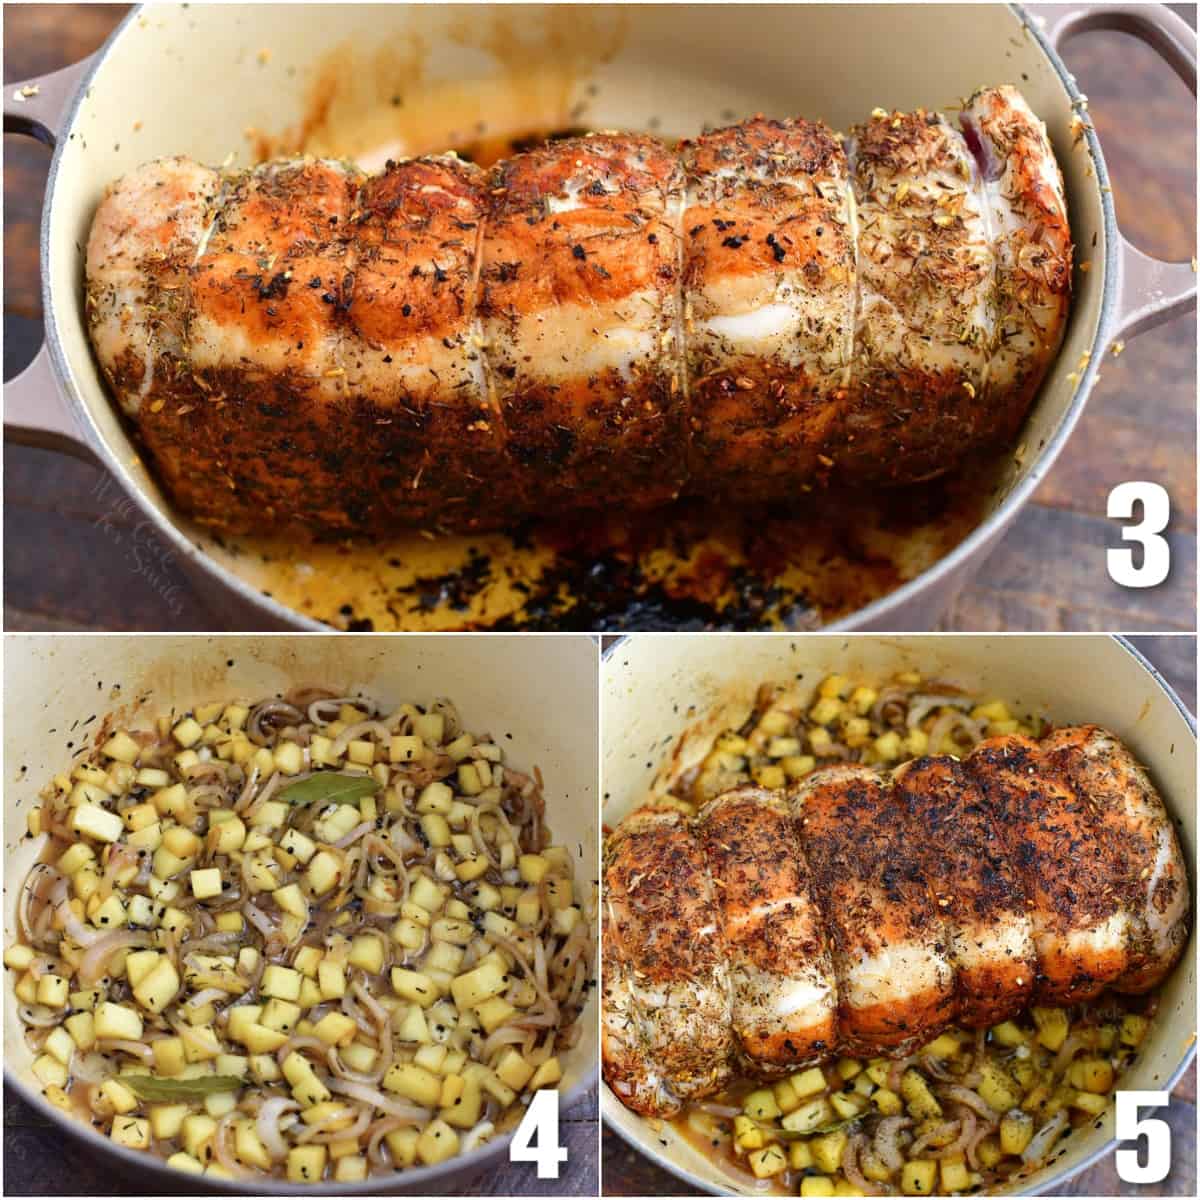 collage of three images of searing pork loin, cooking veggies, and seared pork loin in a pot over veggies.